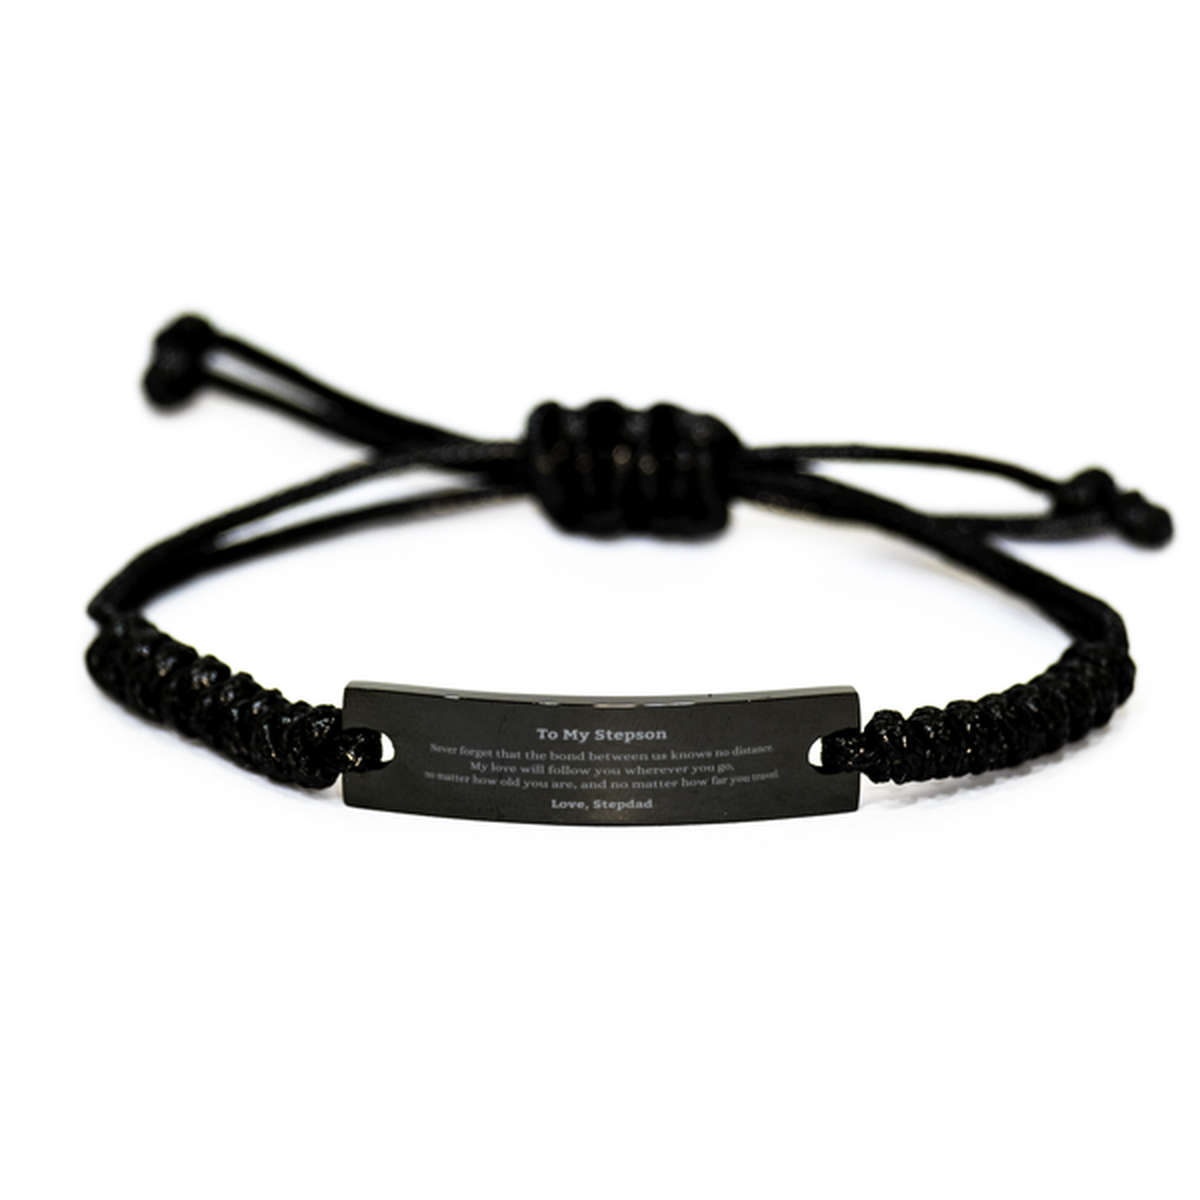 Stepson Birthday Gifts from Stepdad, Adjustable Black Rope Bracelet for Stepson Christmas Graduation Unique Gifts Stepson Never forget that the bond between us knows no distance. Love, Stepdad